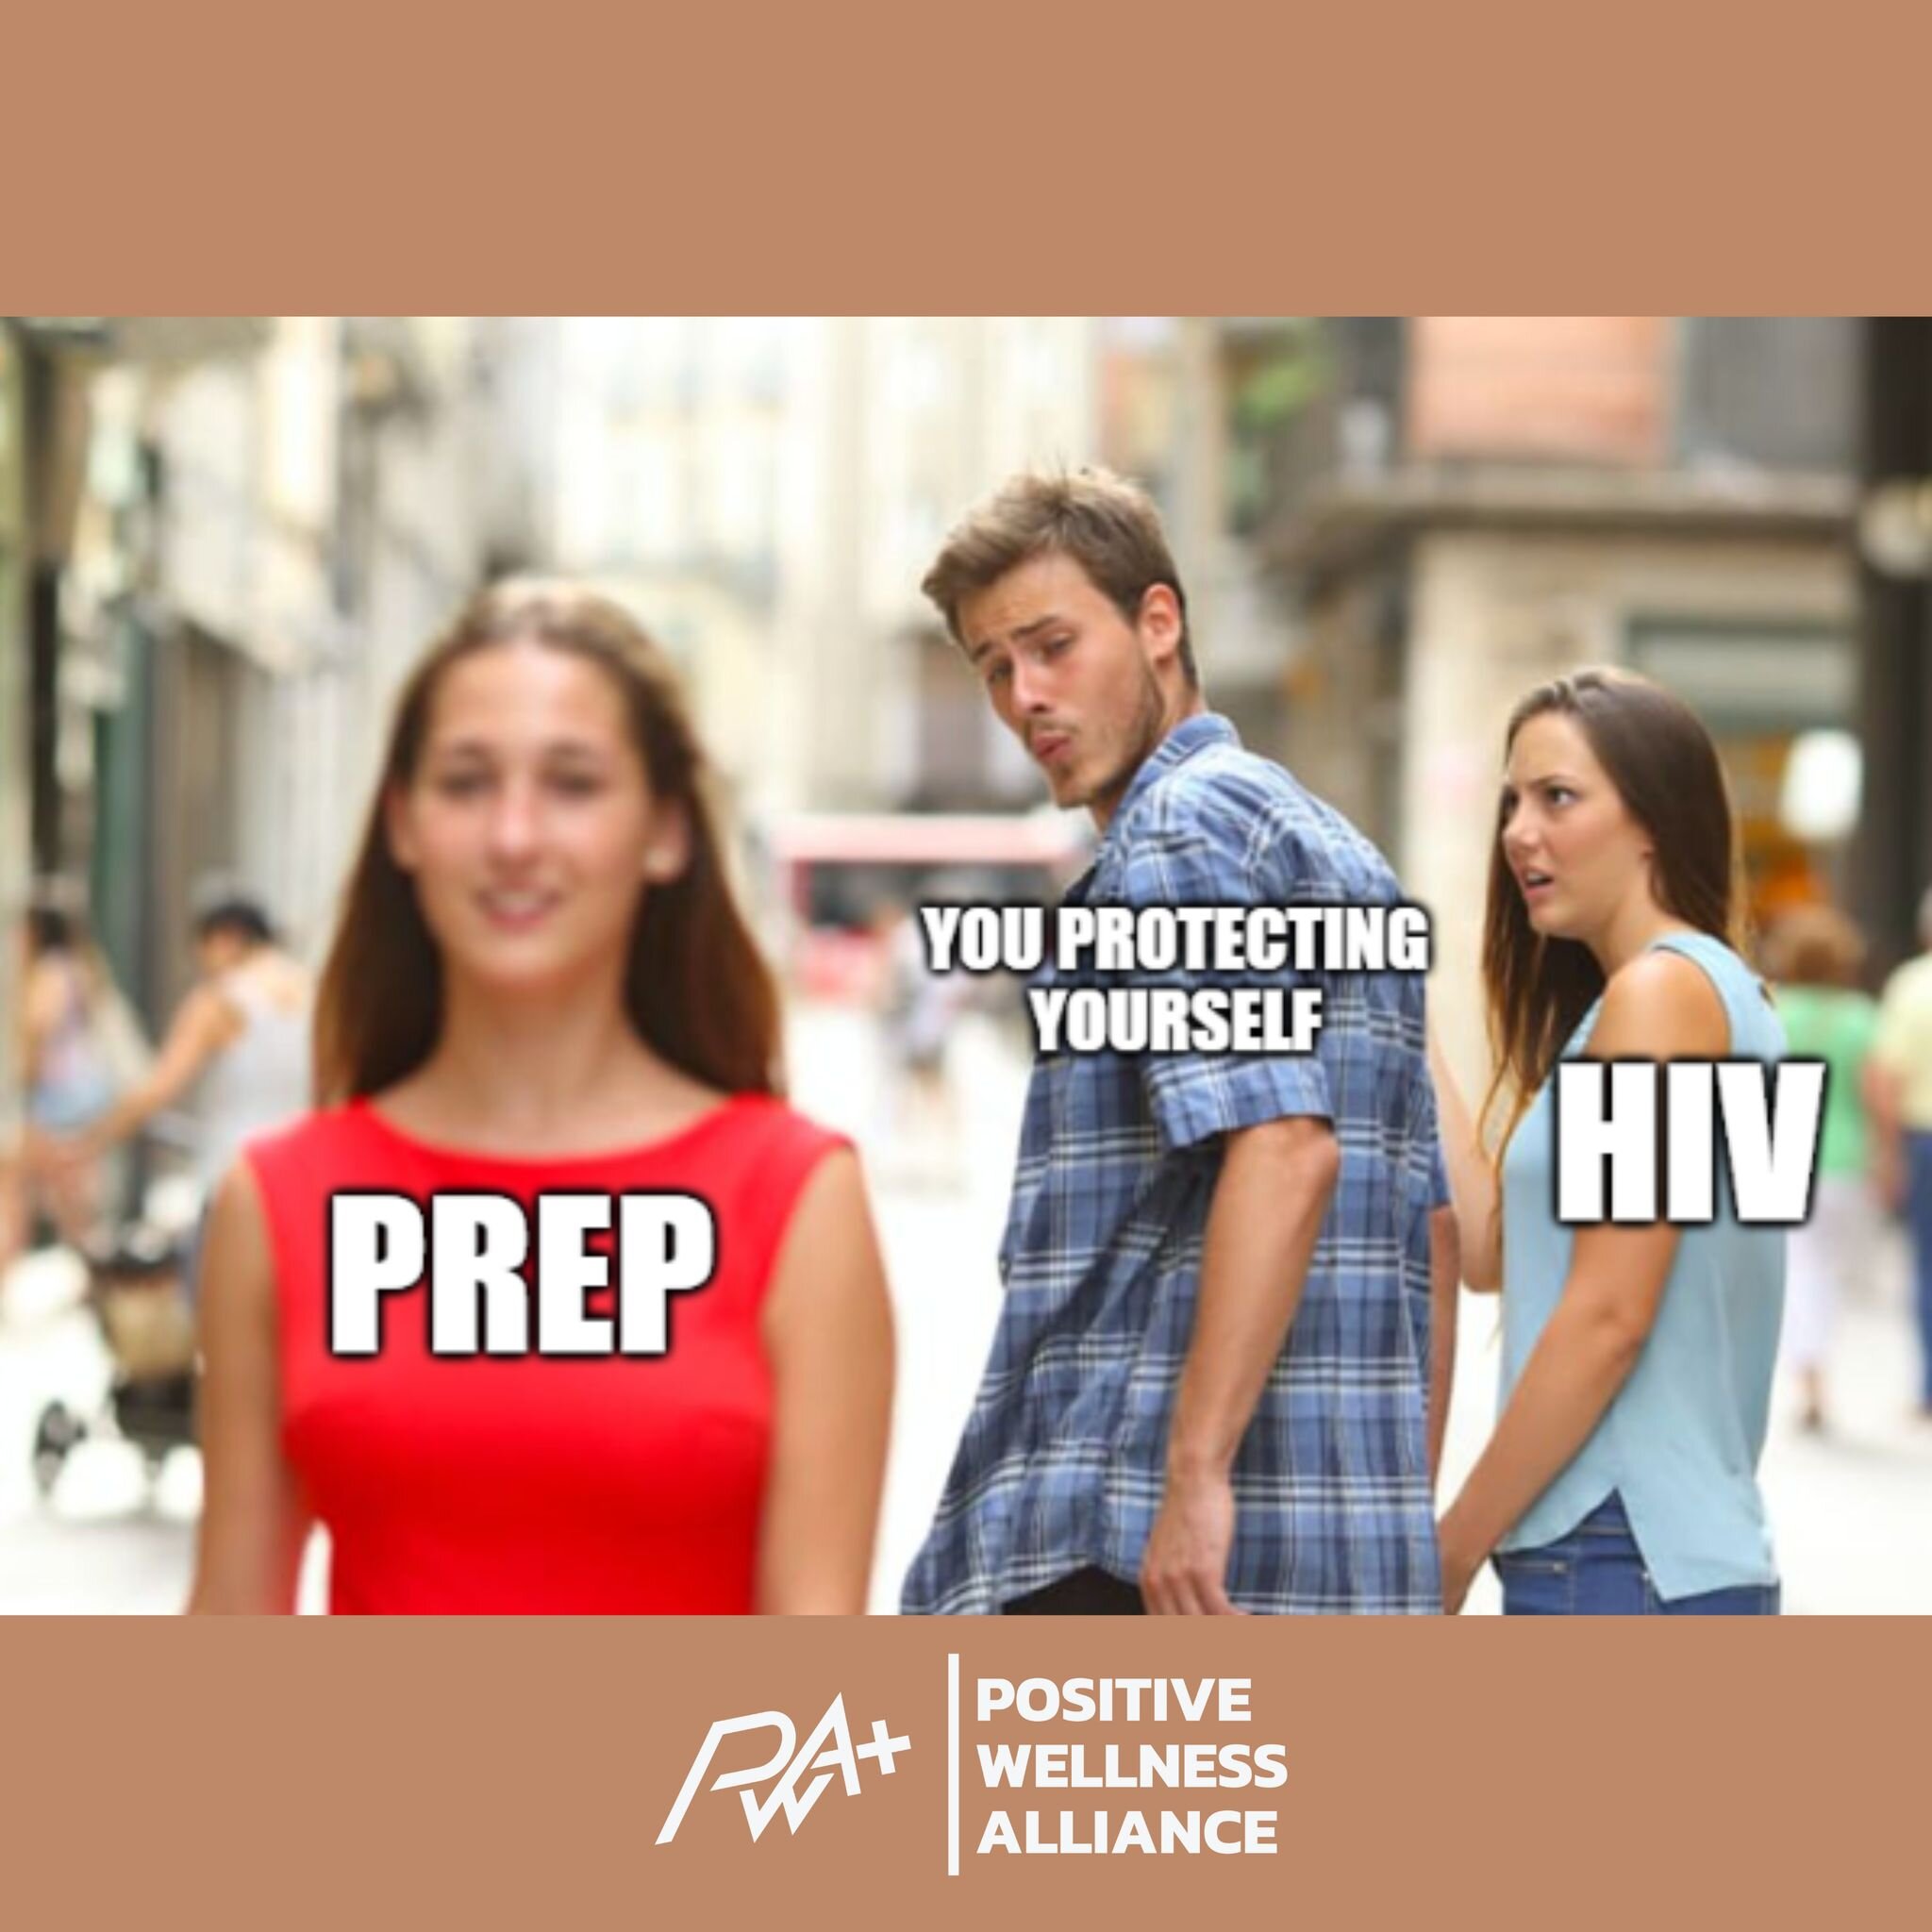 HIV is REAL and PrEP is 99% effective when taken as prescribed. Protect yourself. Visit the link in our bio if you need assistance in finding and paying for PrEP.

 #prep #healthcare #hiv #student #college